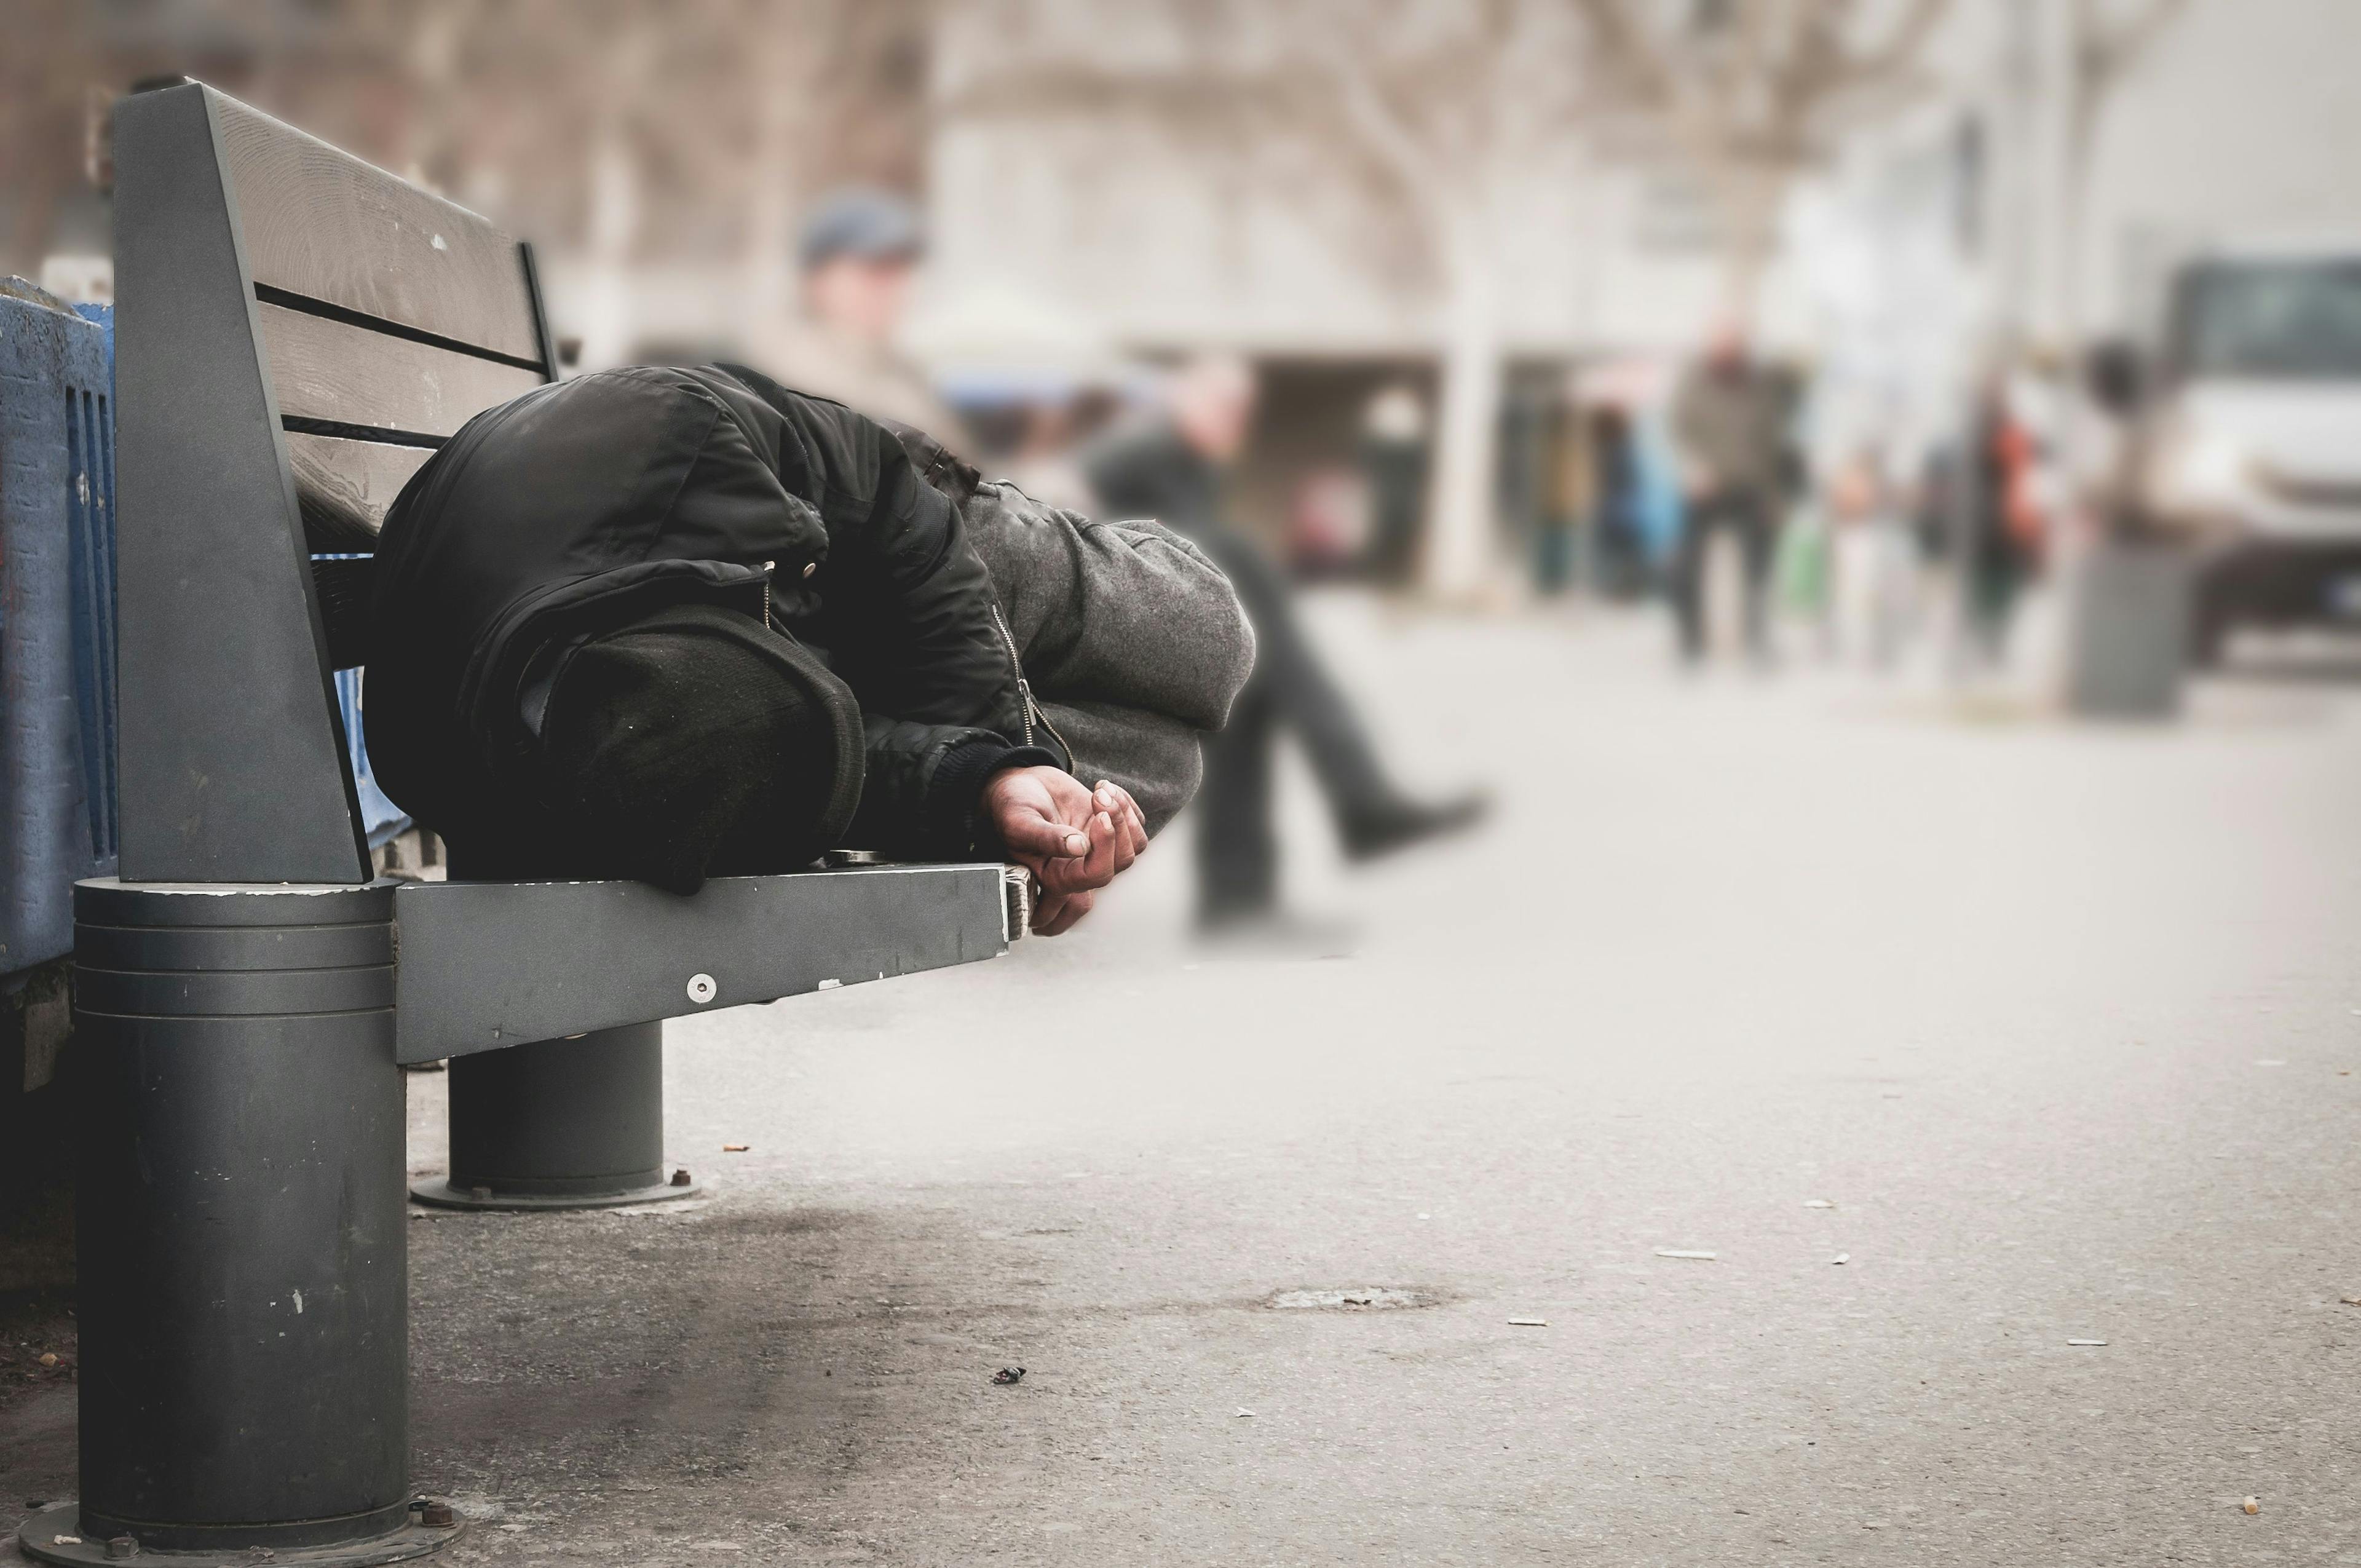 Homeless Individuals at Higher Risk of Skin Conditions